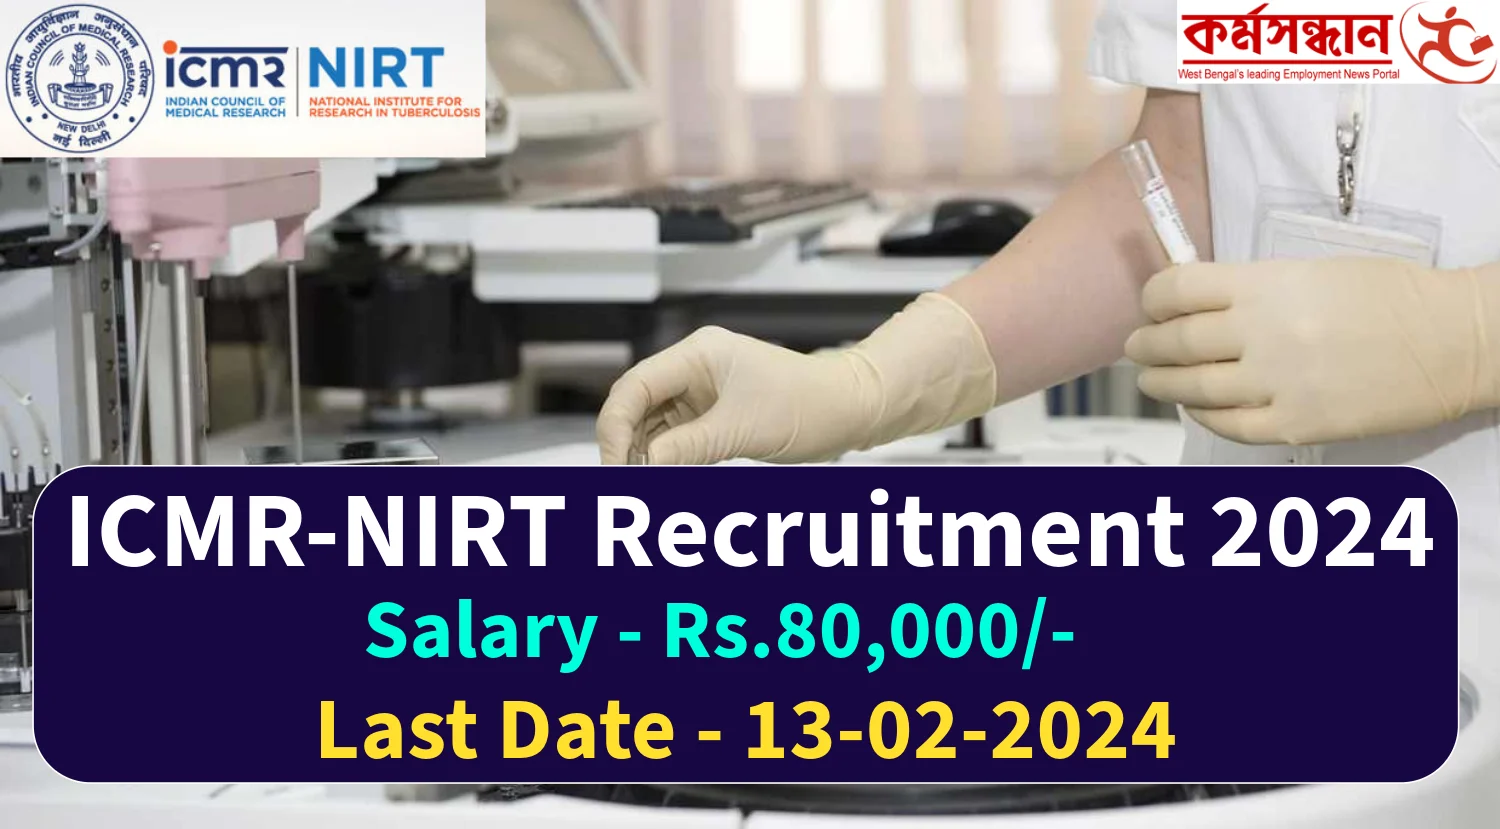 ICMR-NIRT Recruitment 2024 for DEO, UDC and MTS Posts